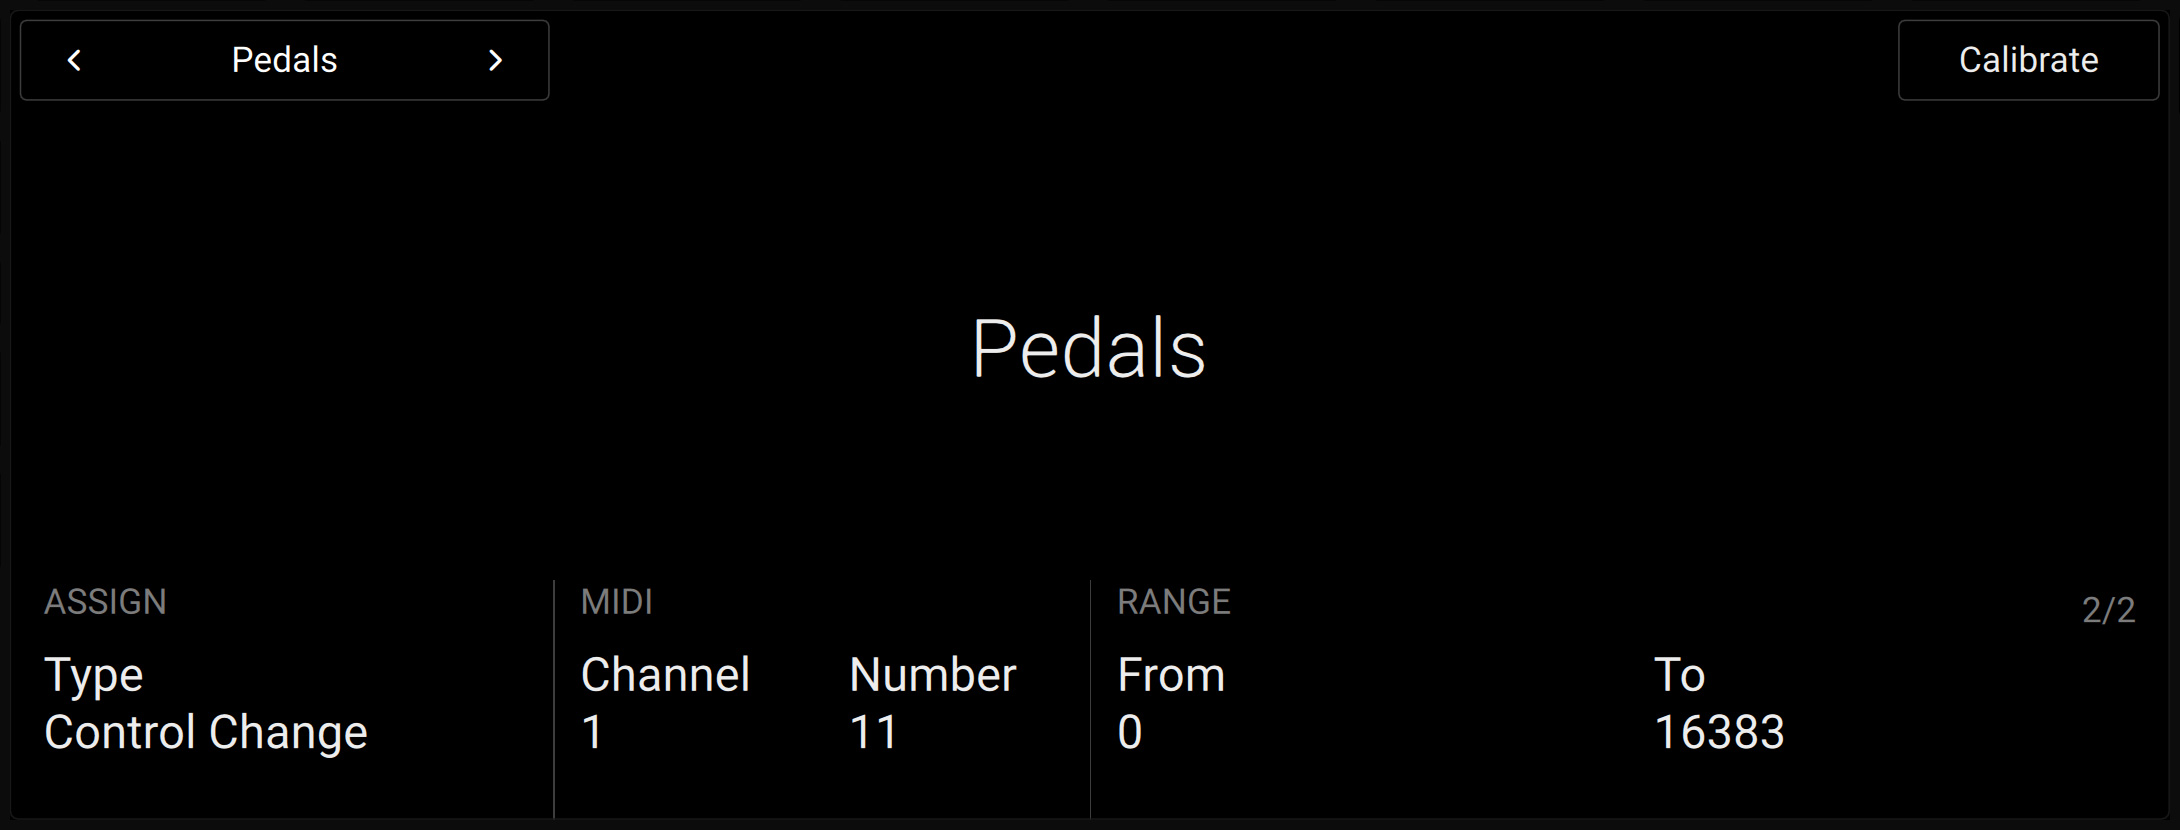 KS-MK3_D_Settings-Pedals-Continuous-Page2.jpg